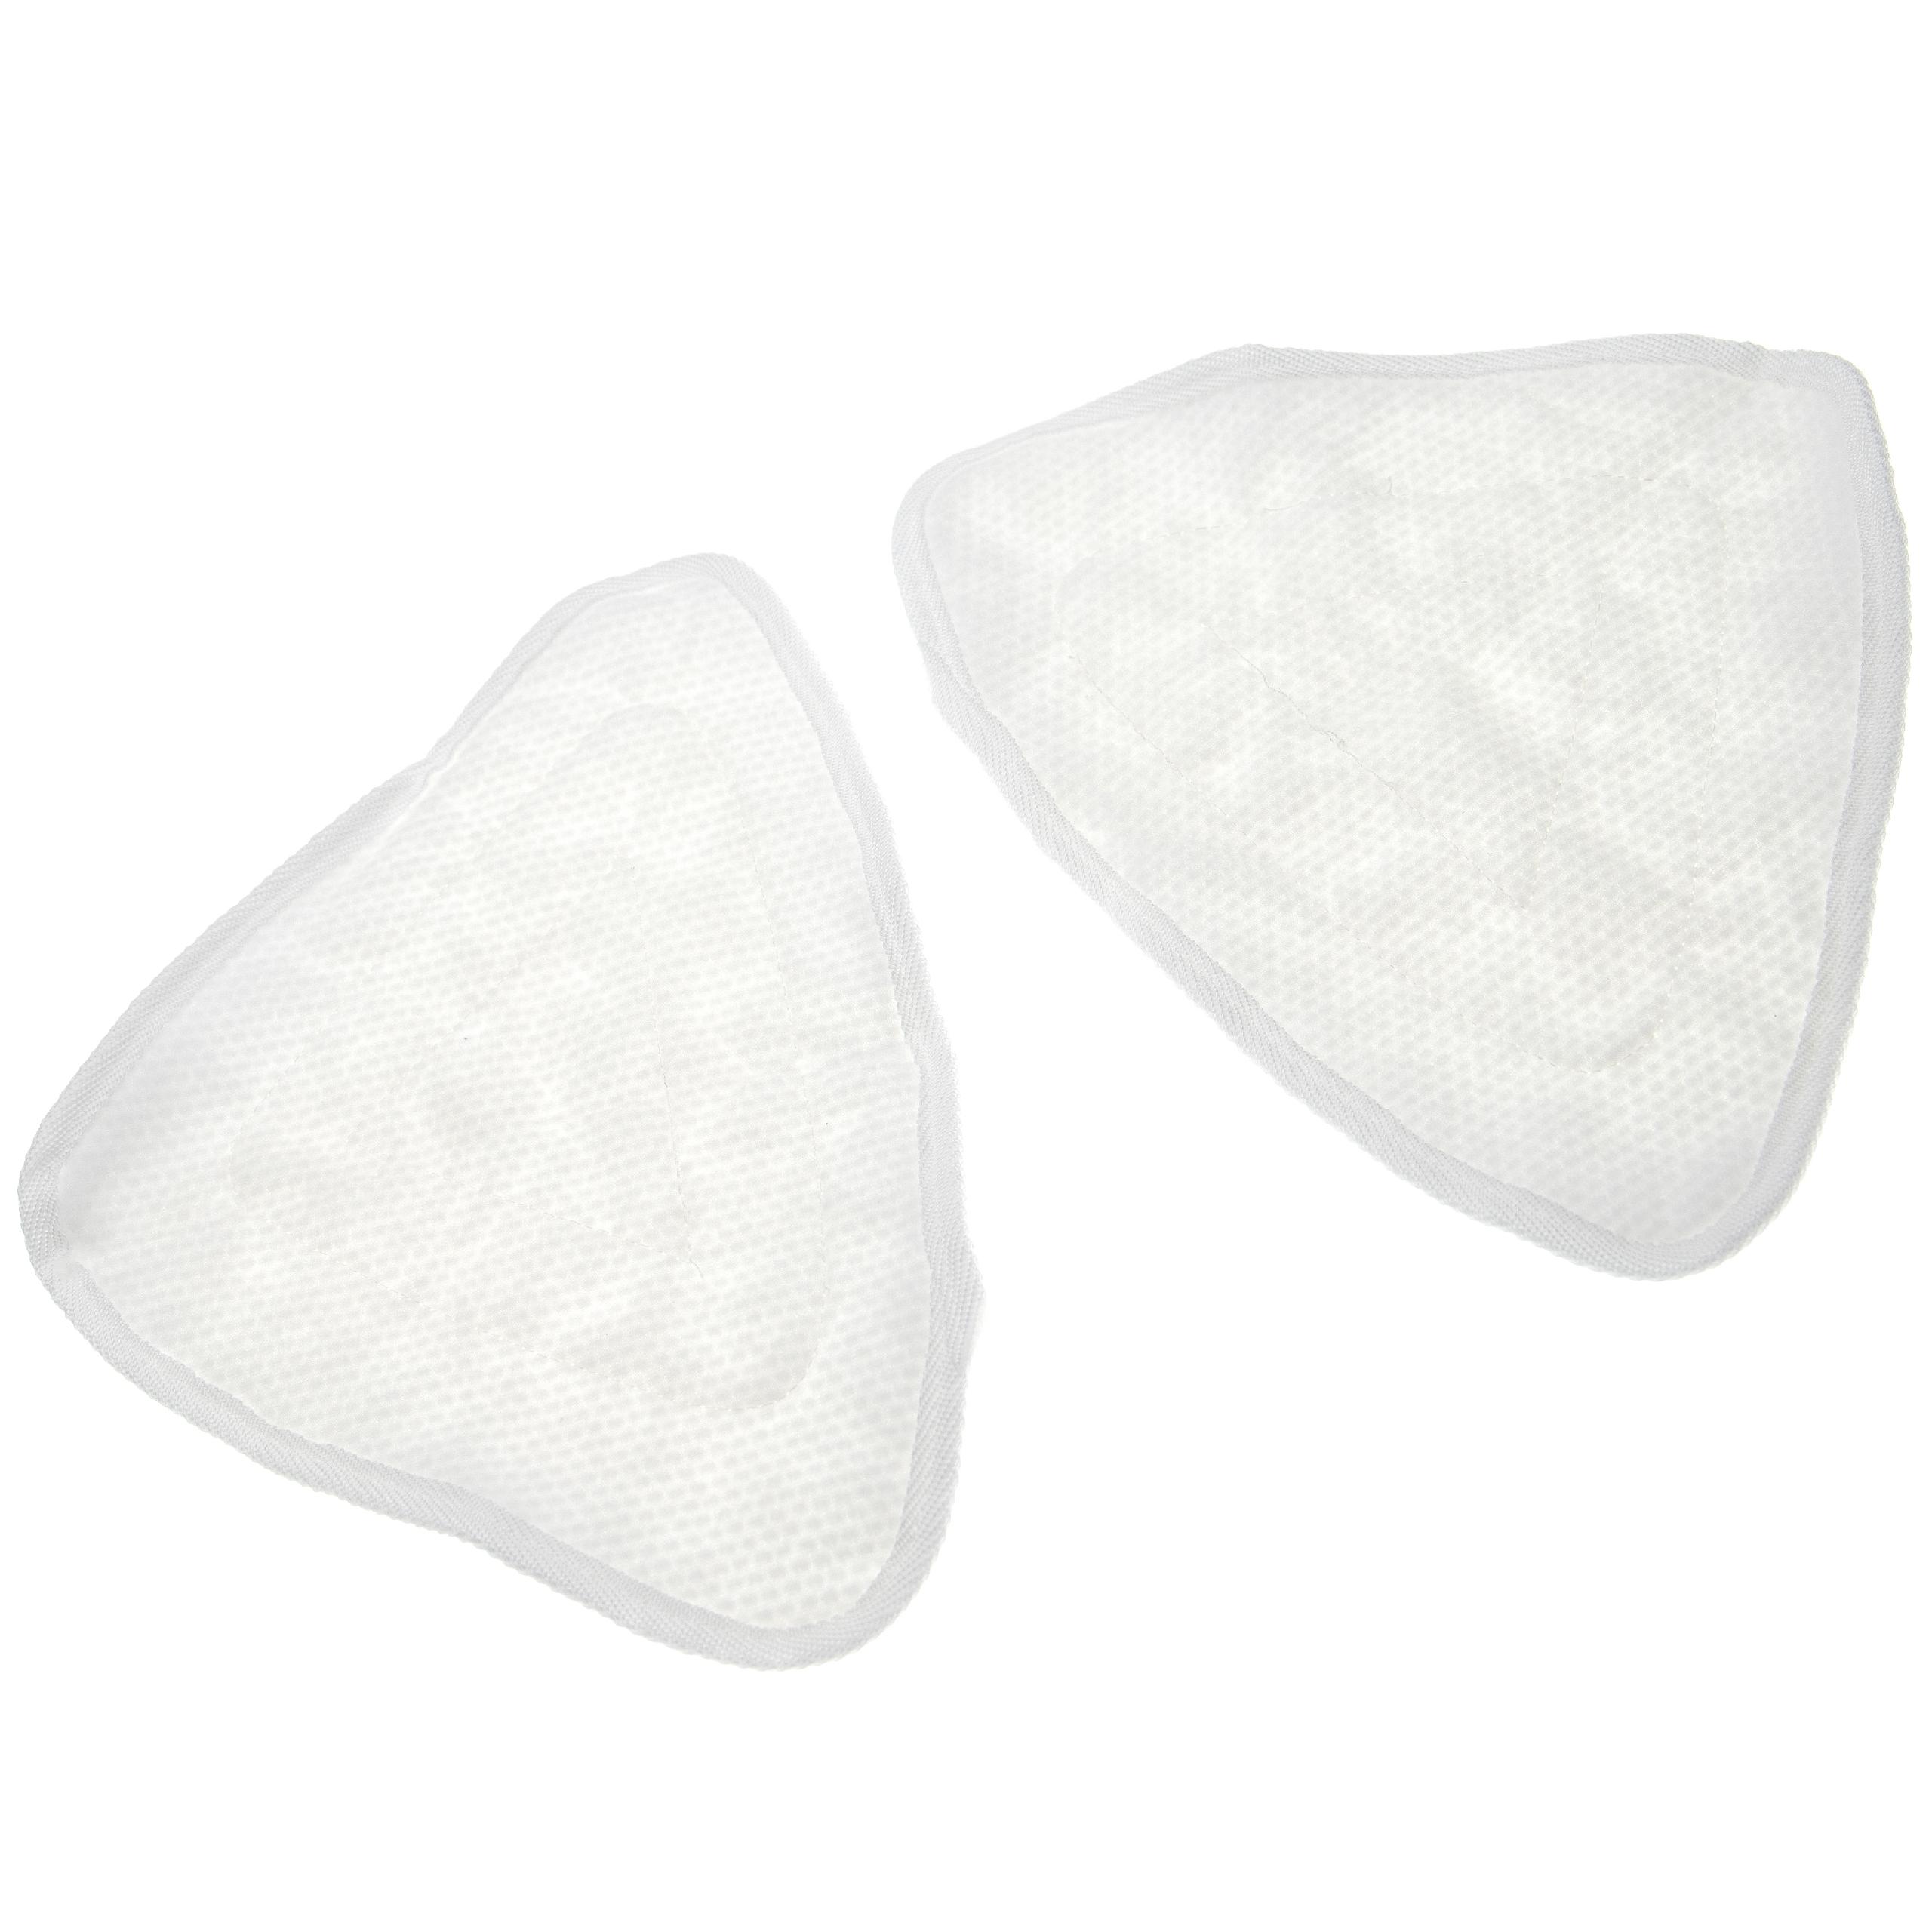 2x Cleaning Pad replaces Vileda 146576 for ViledaHot Spray Steamer, Steam Mop - Microfibre White